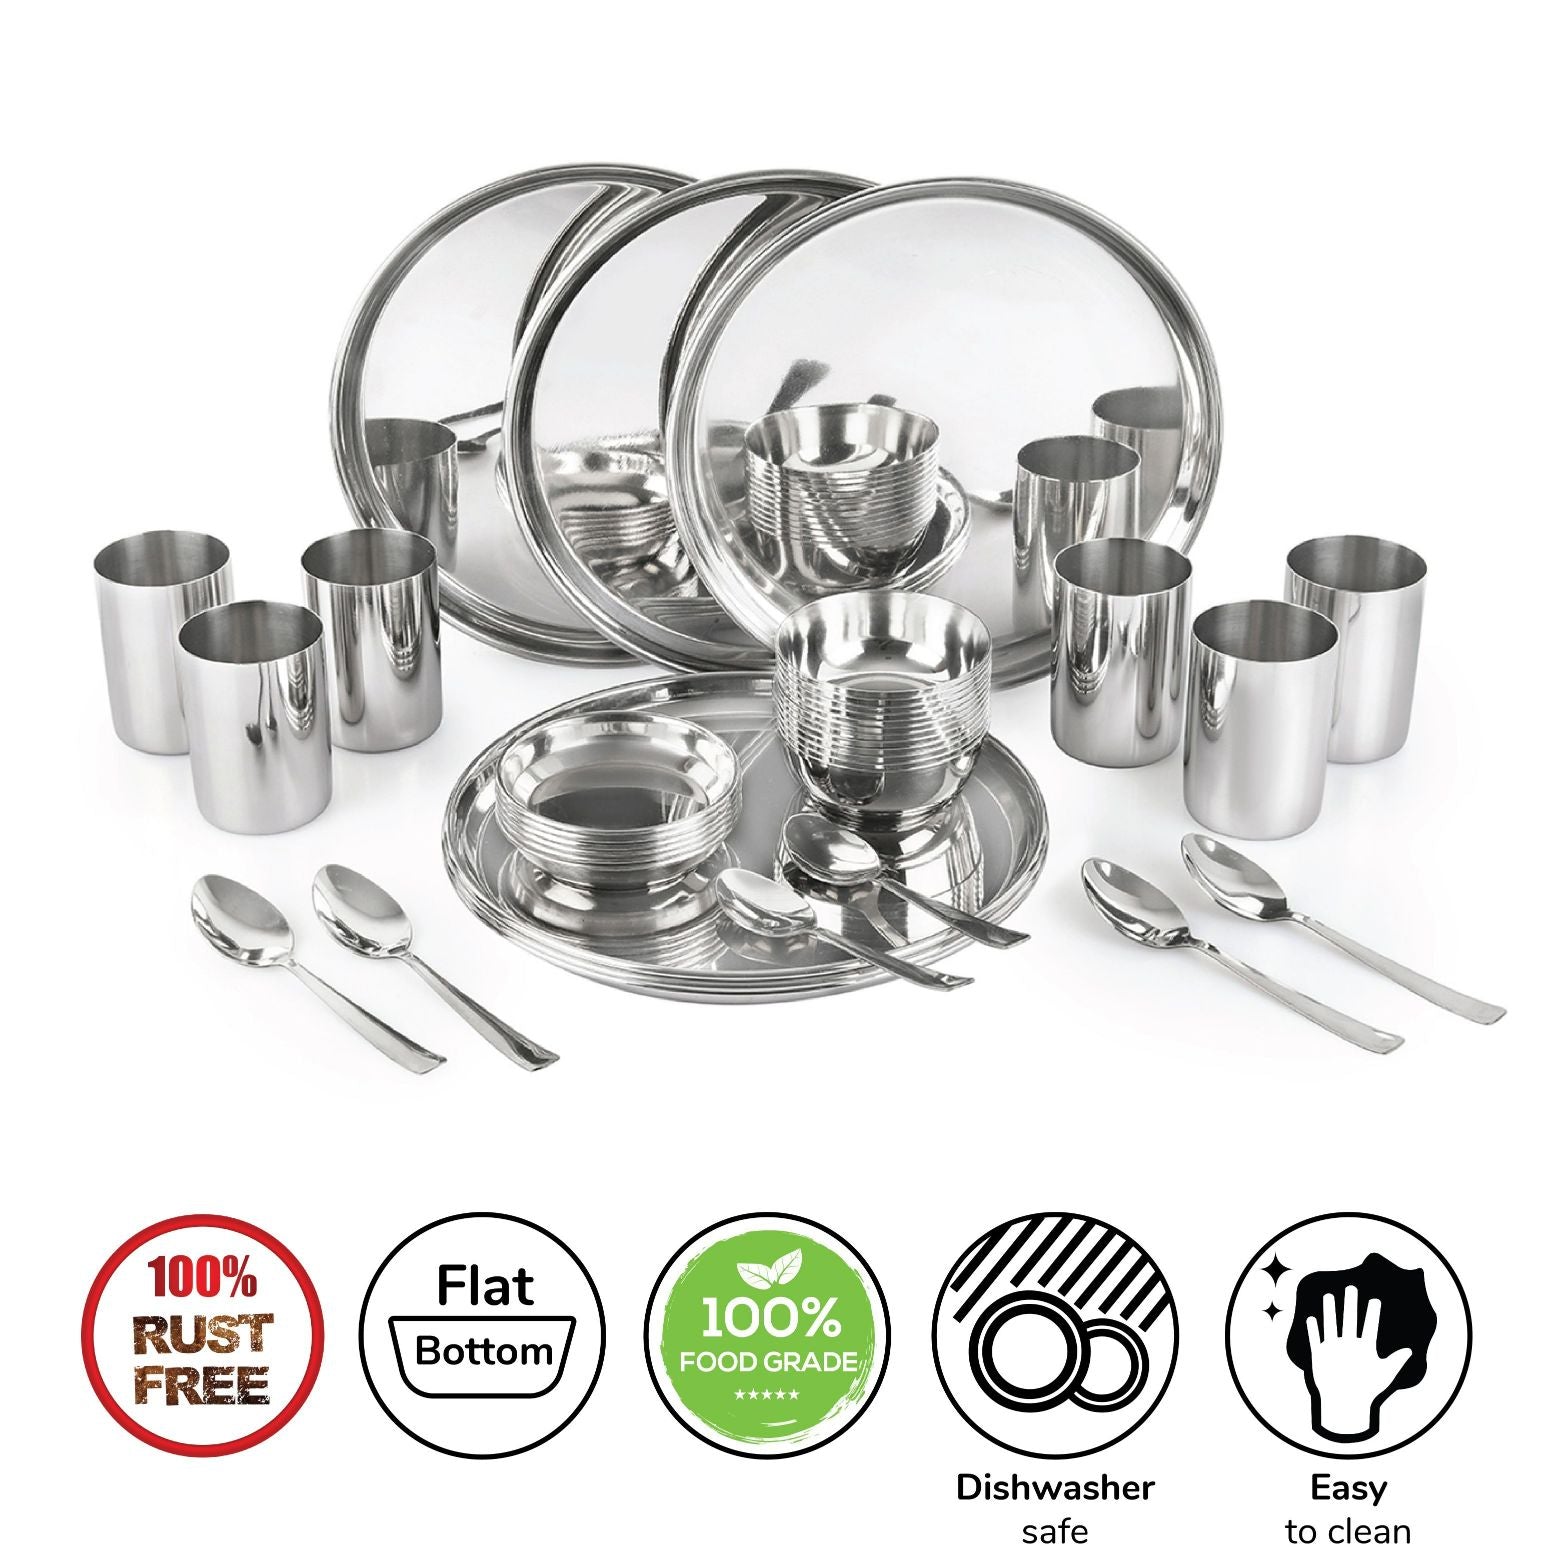 A durable 36-piece stainless steel dinner set for a family of 6